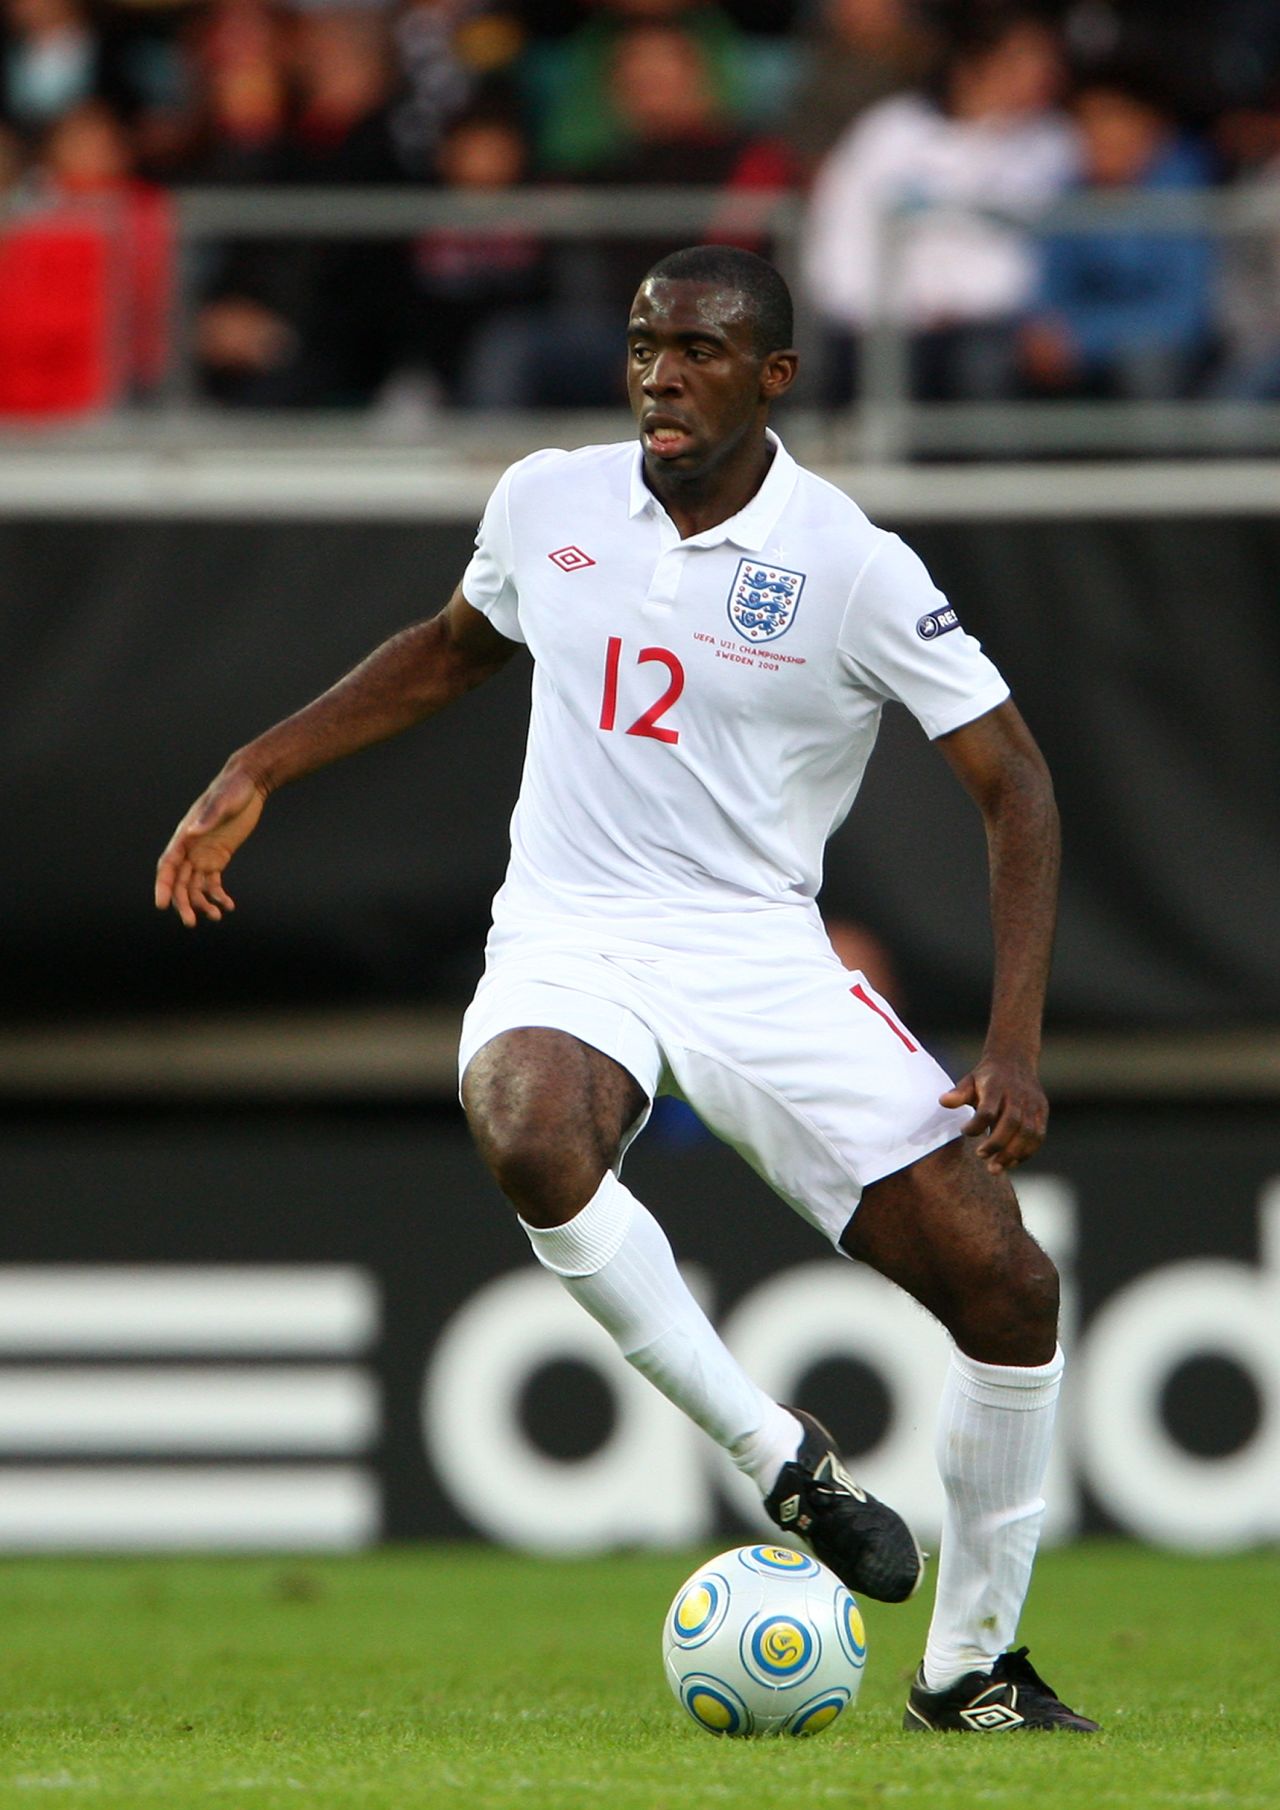 Muamba came to England in 1999 after his family left his homeland, the Democratic Republic of Congo. He represented his adopted country at under-21 level at the 2009 European Championship.